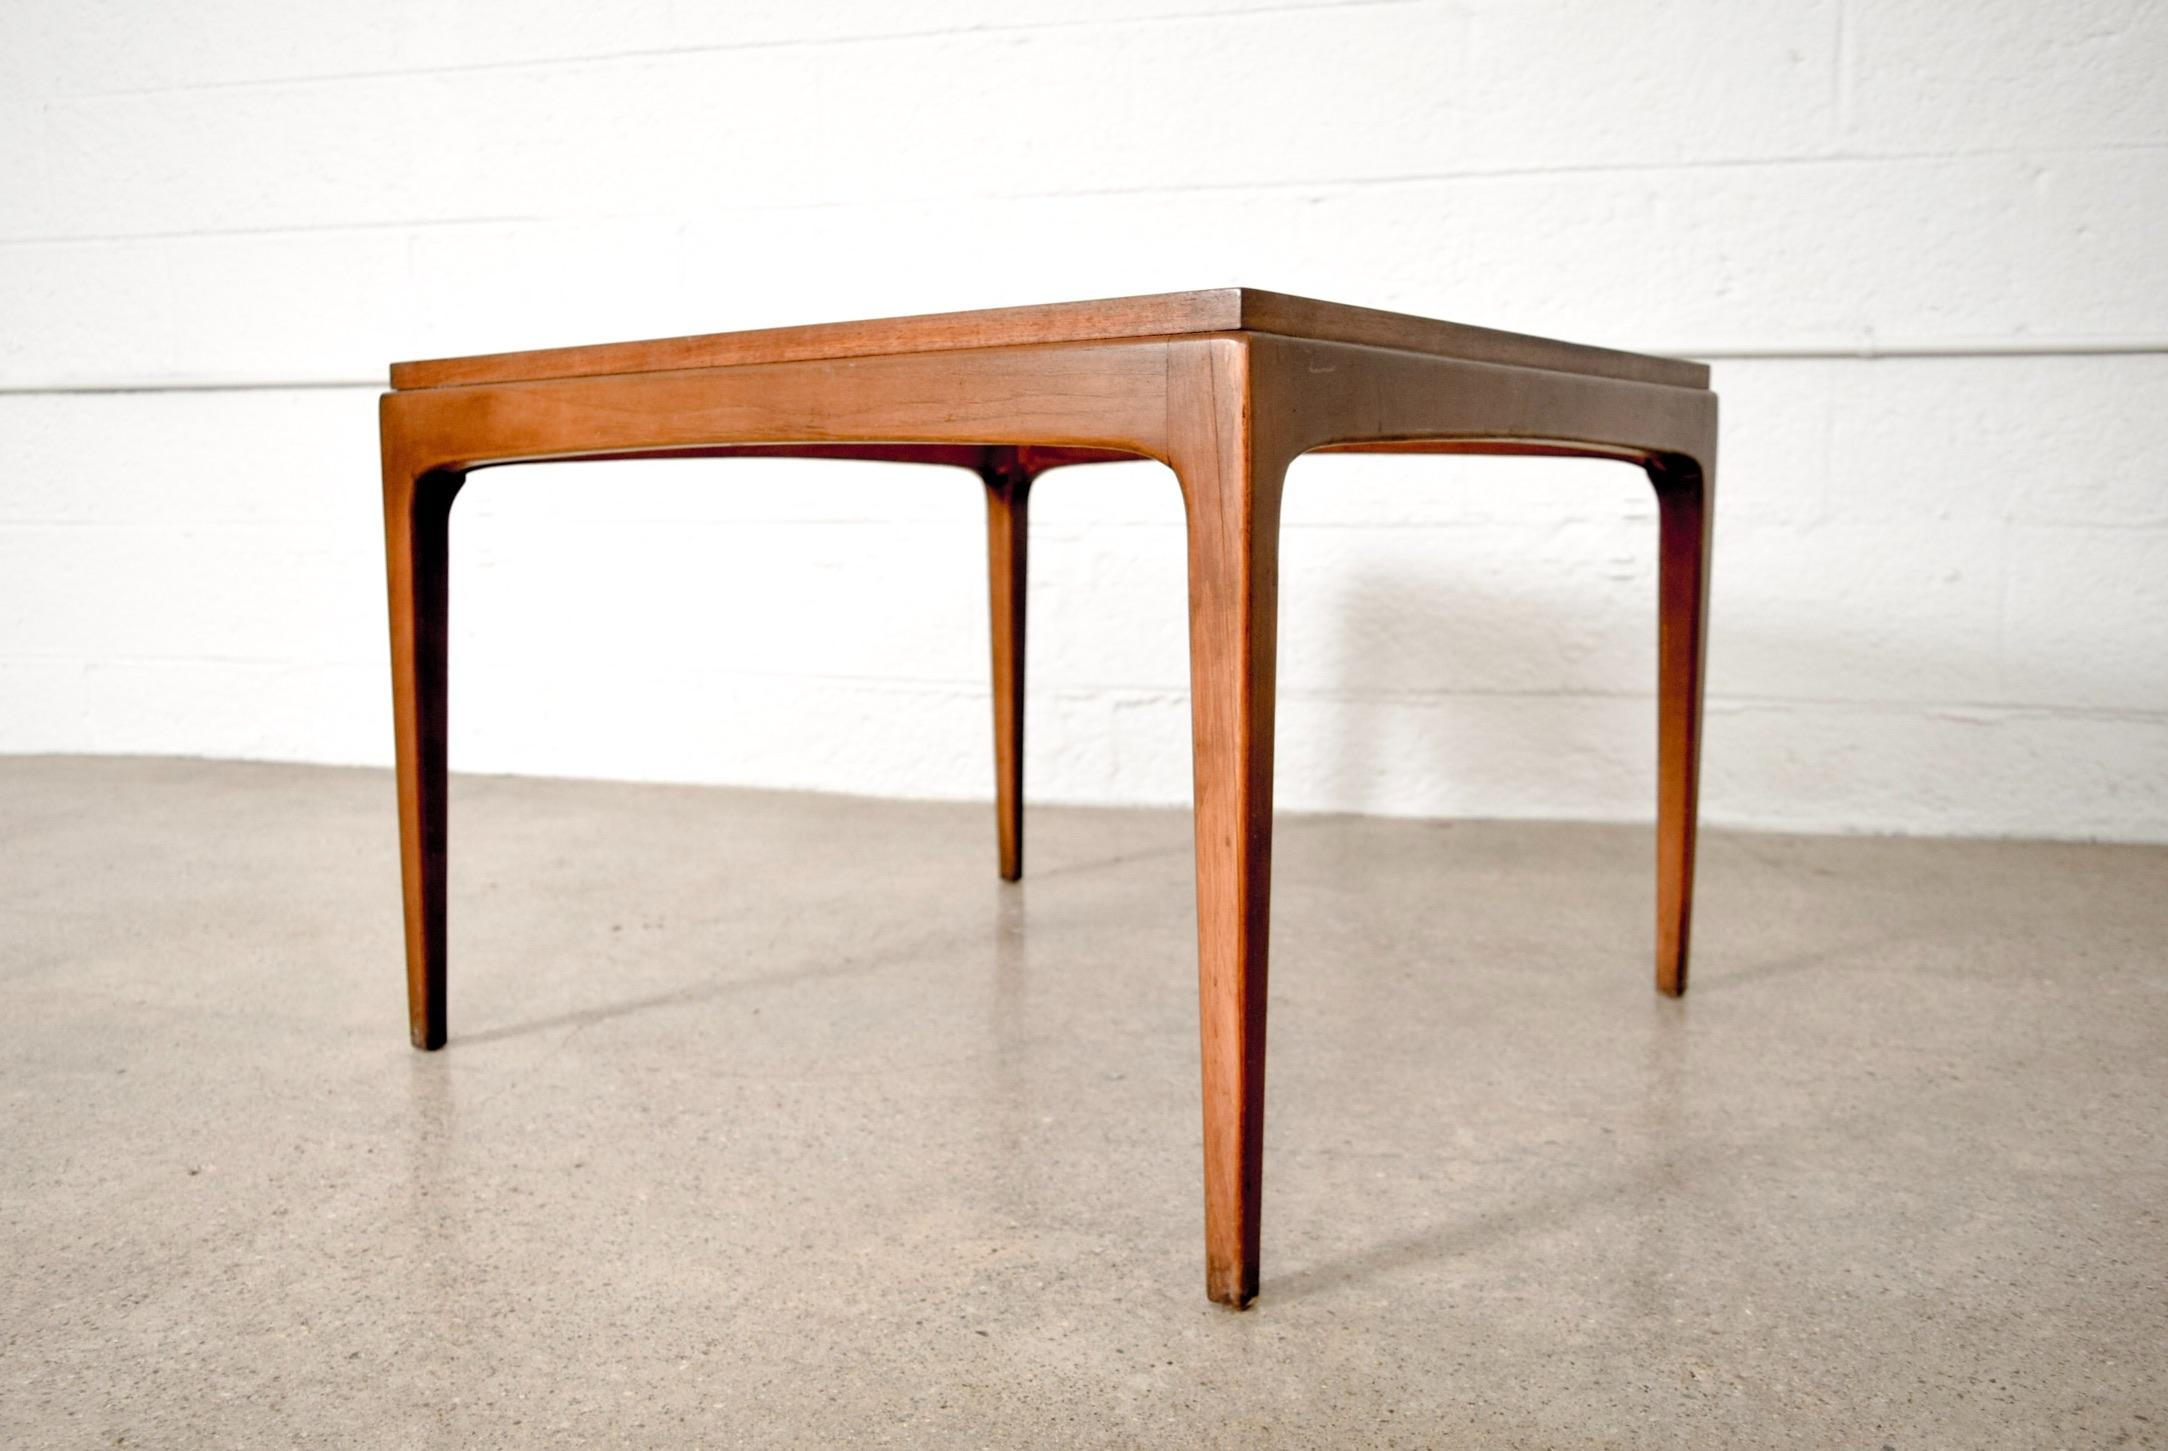 American Midcentury Lane Square Walnut Wood Coffee or End Table, 1960s